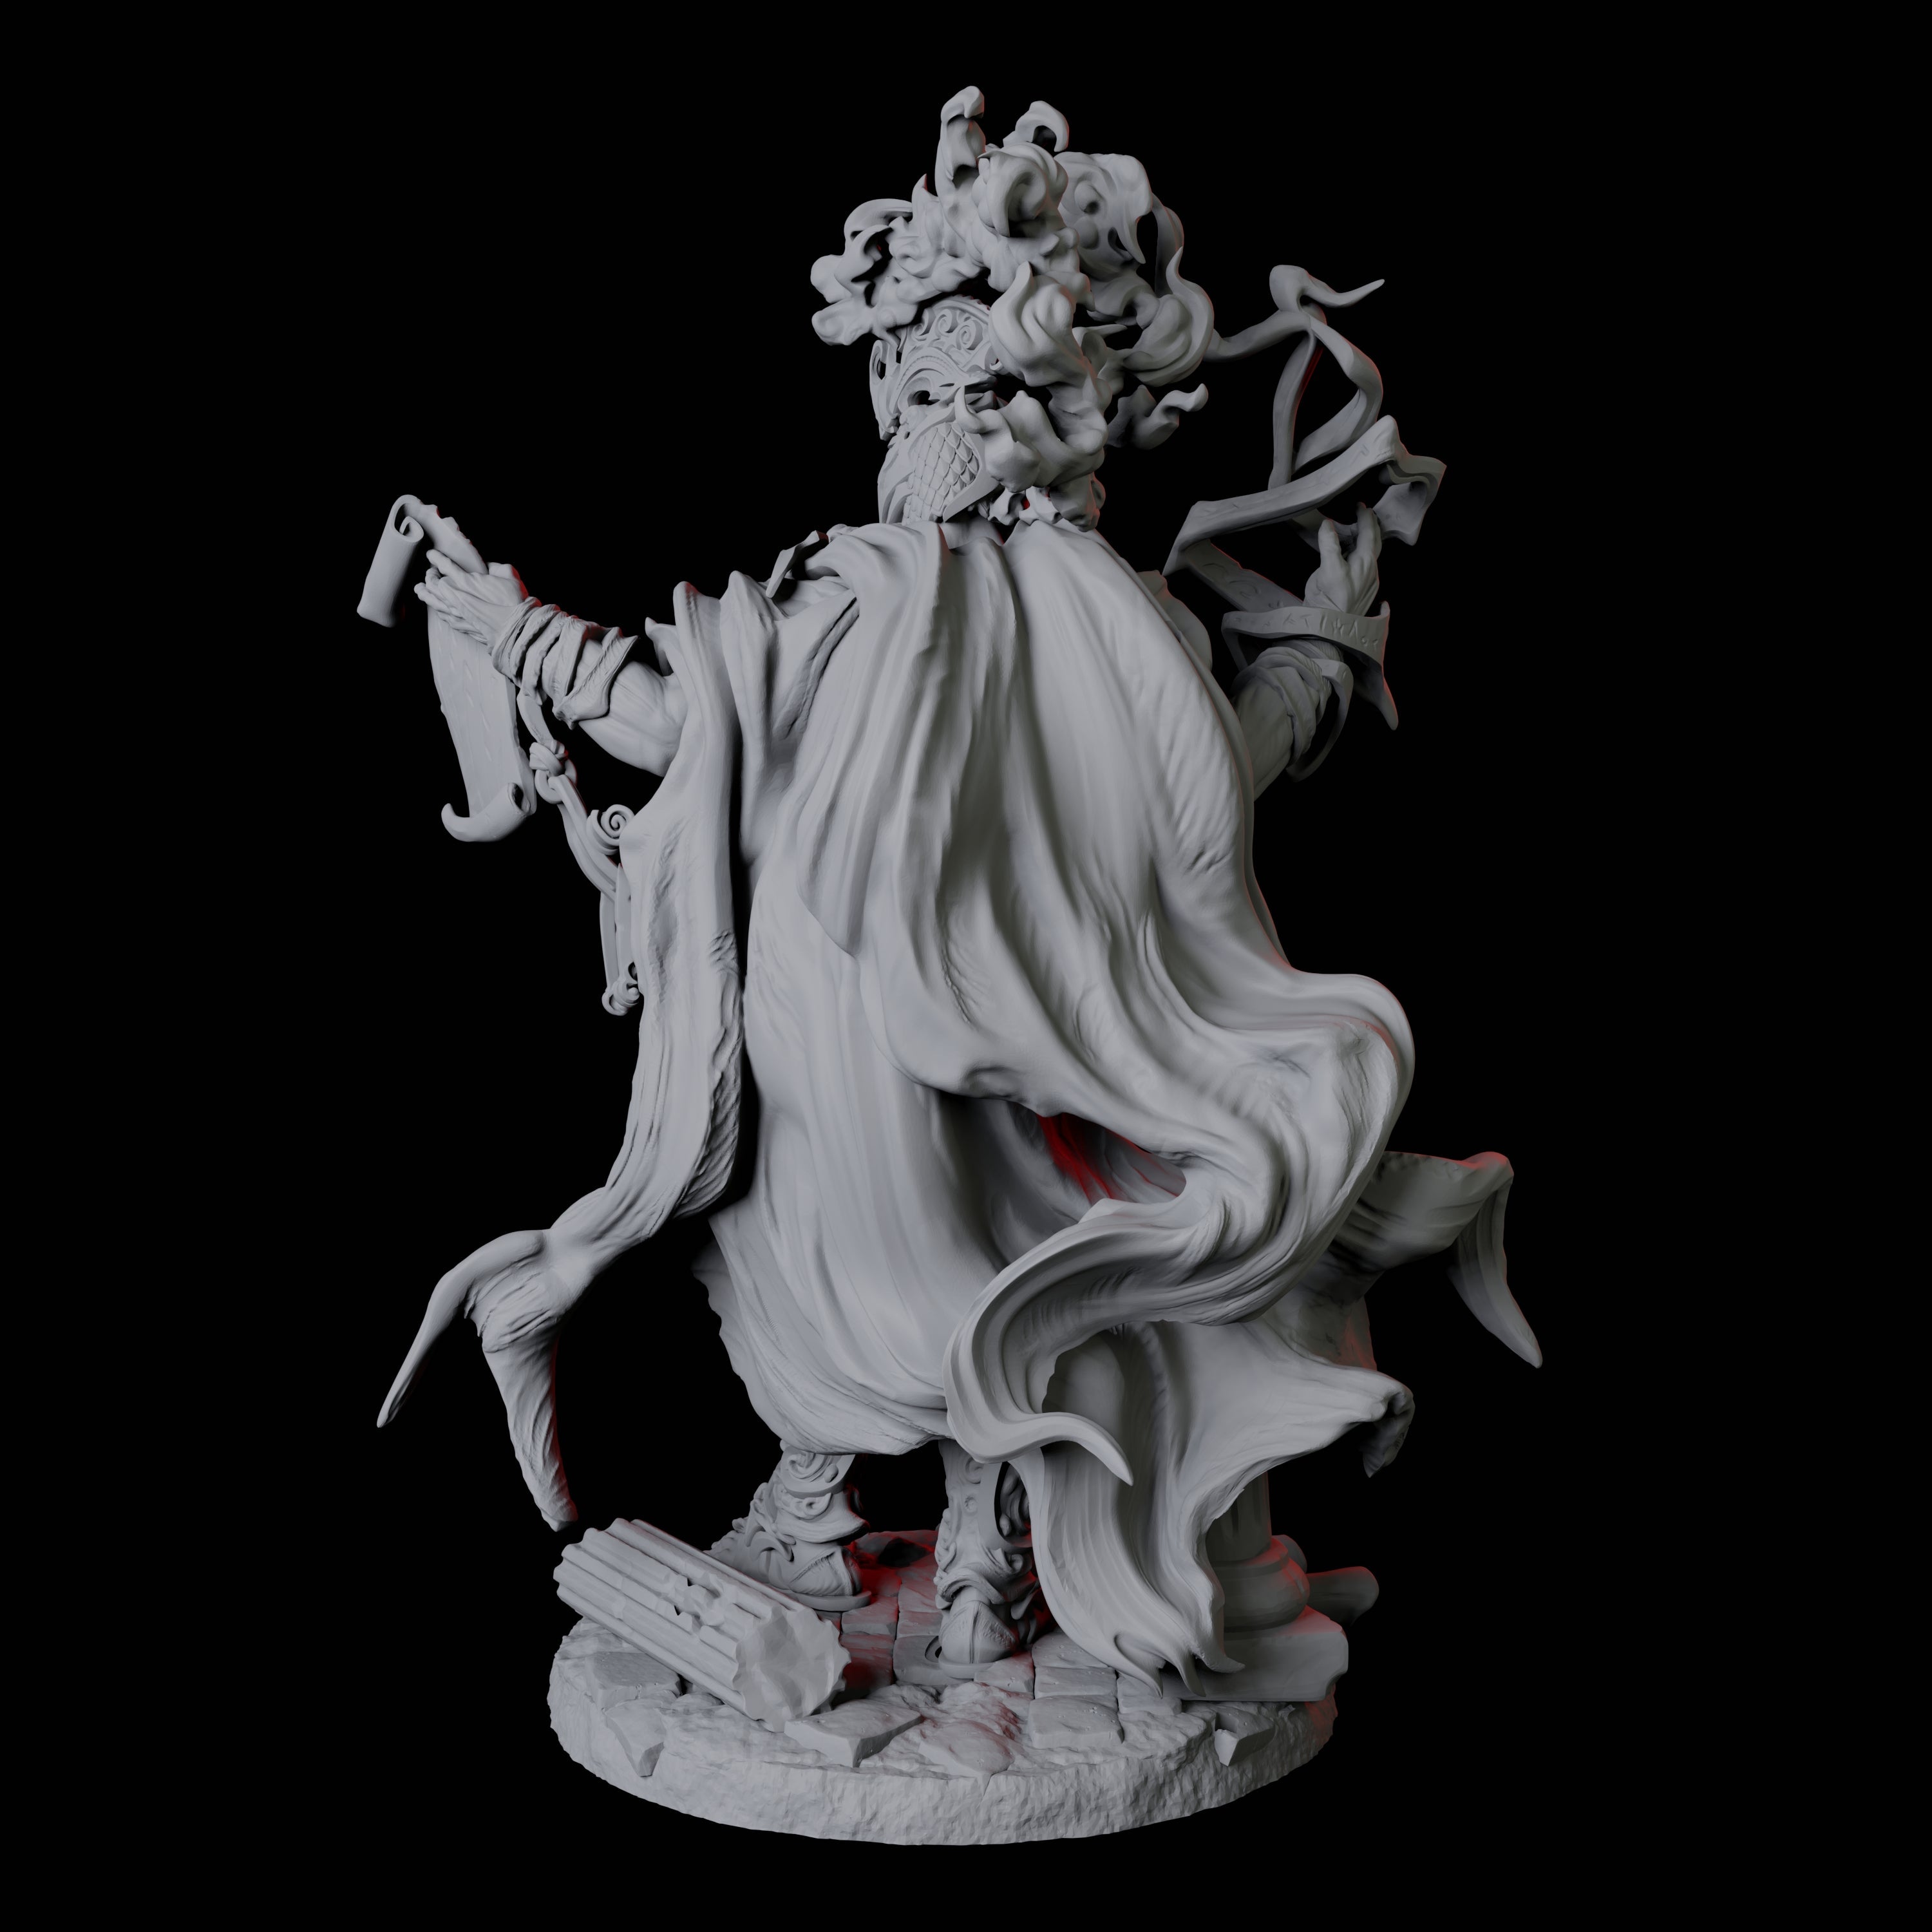 Storm Giant Orator Miniature for Dungeons and Dragons, Pathfinder or other TTRPGs